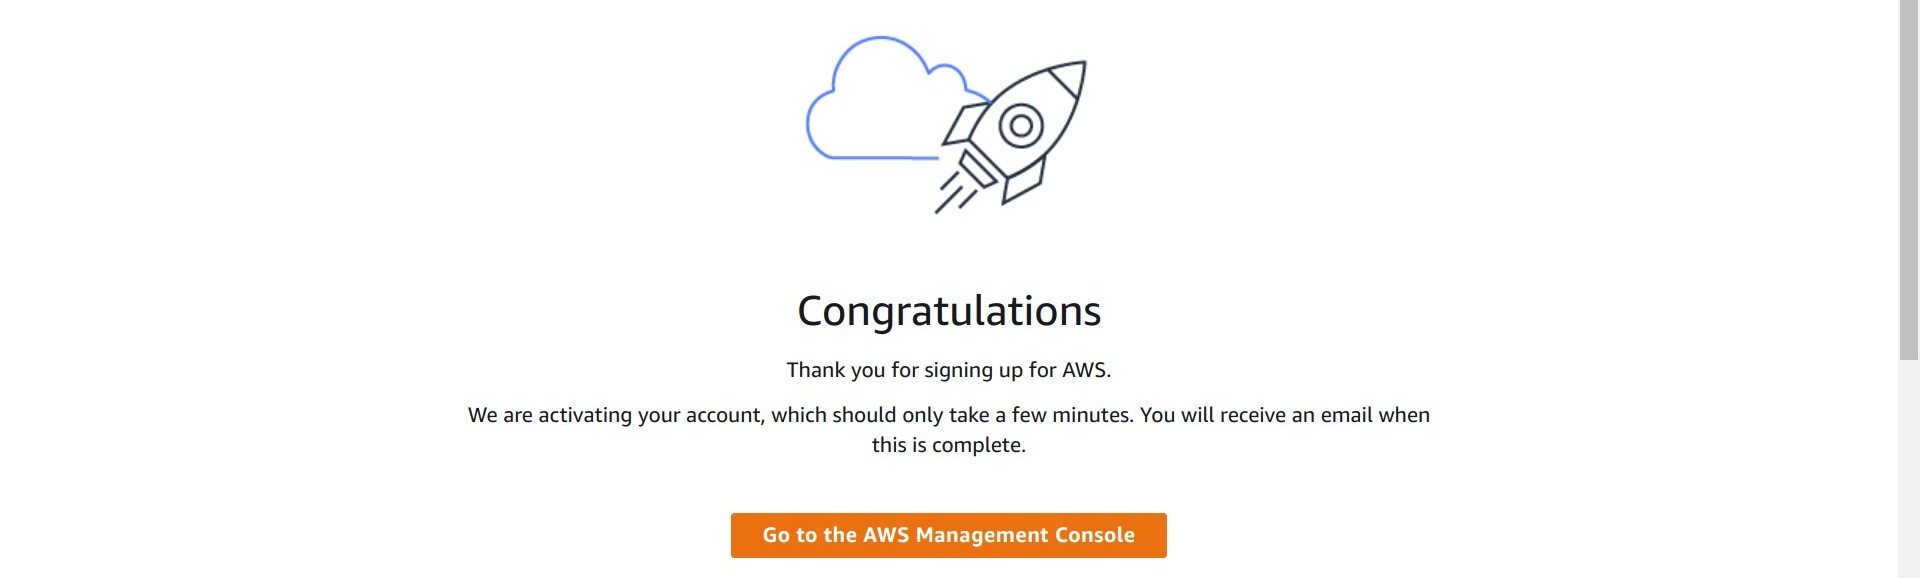 Screen shot of AWS sign up page in a browser showing the Congratulations page and a button to Go to the AWS Management Console"